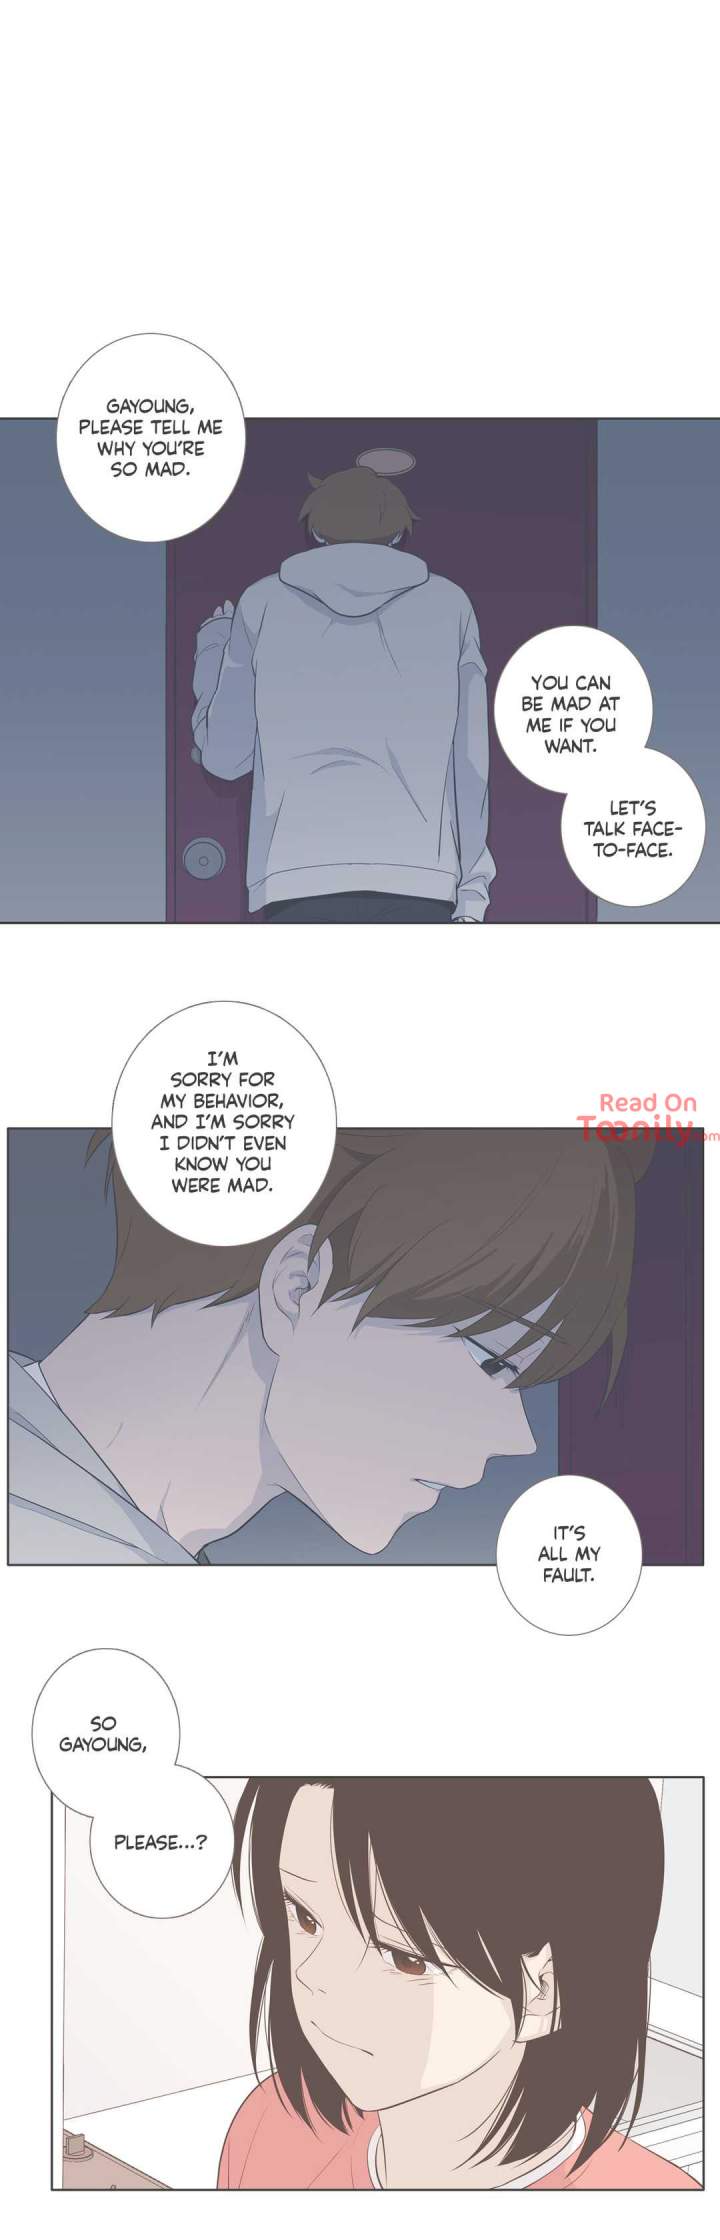 Something About Us - Chapter 81 Page 16